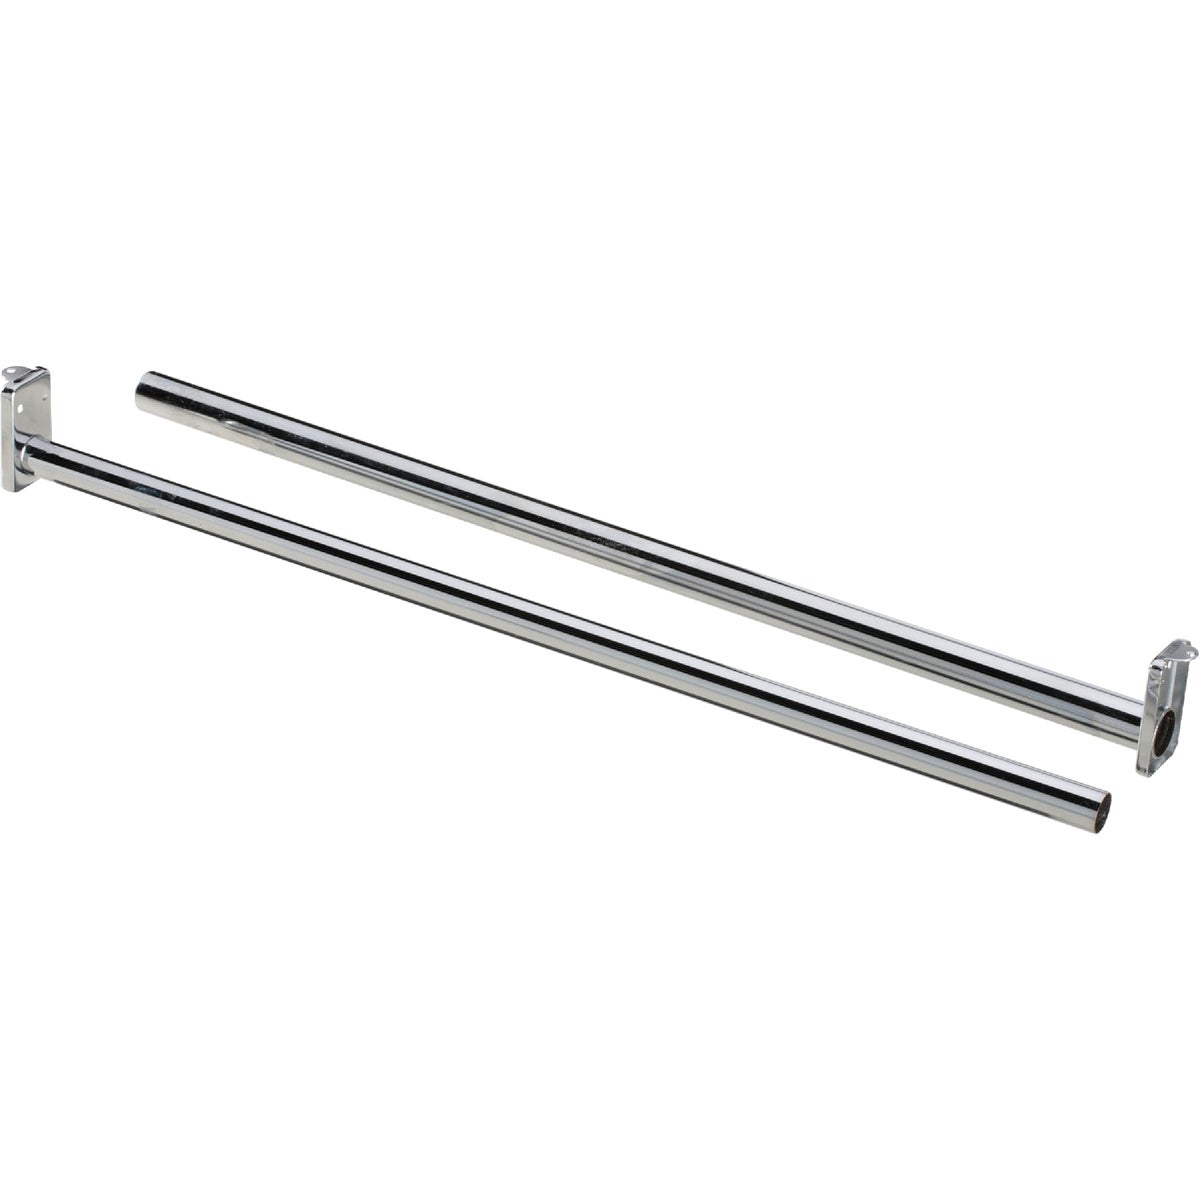 National 30 In. To 48 In. Adjustable Closet Rod, Chrome